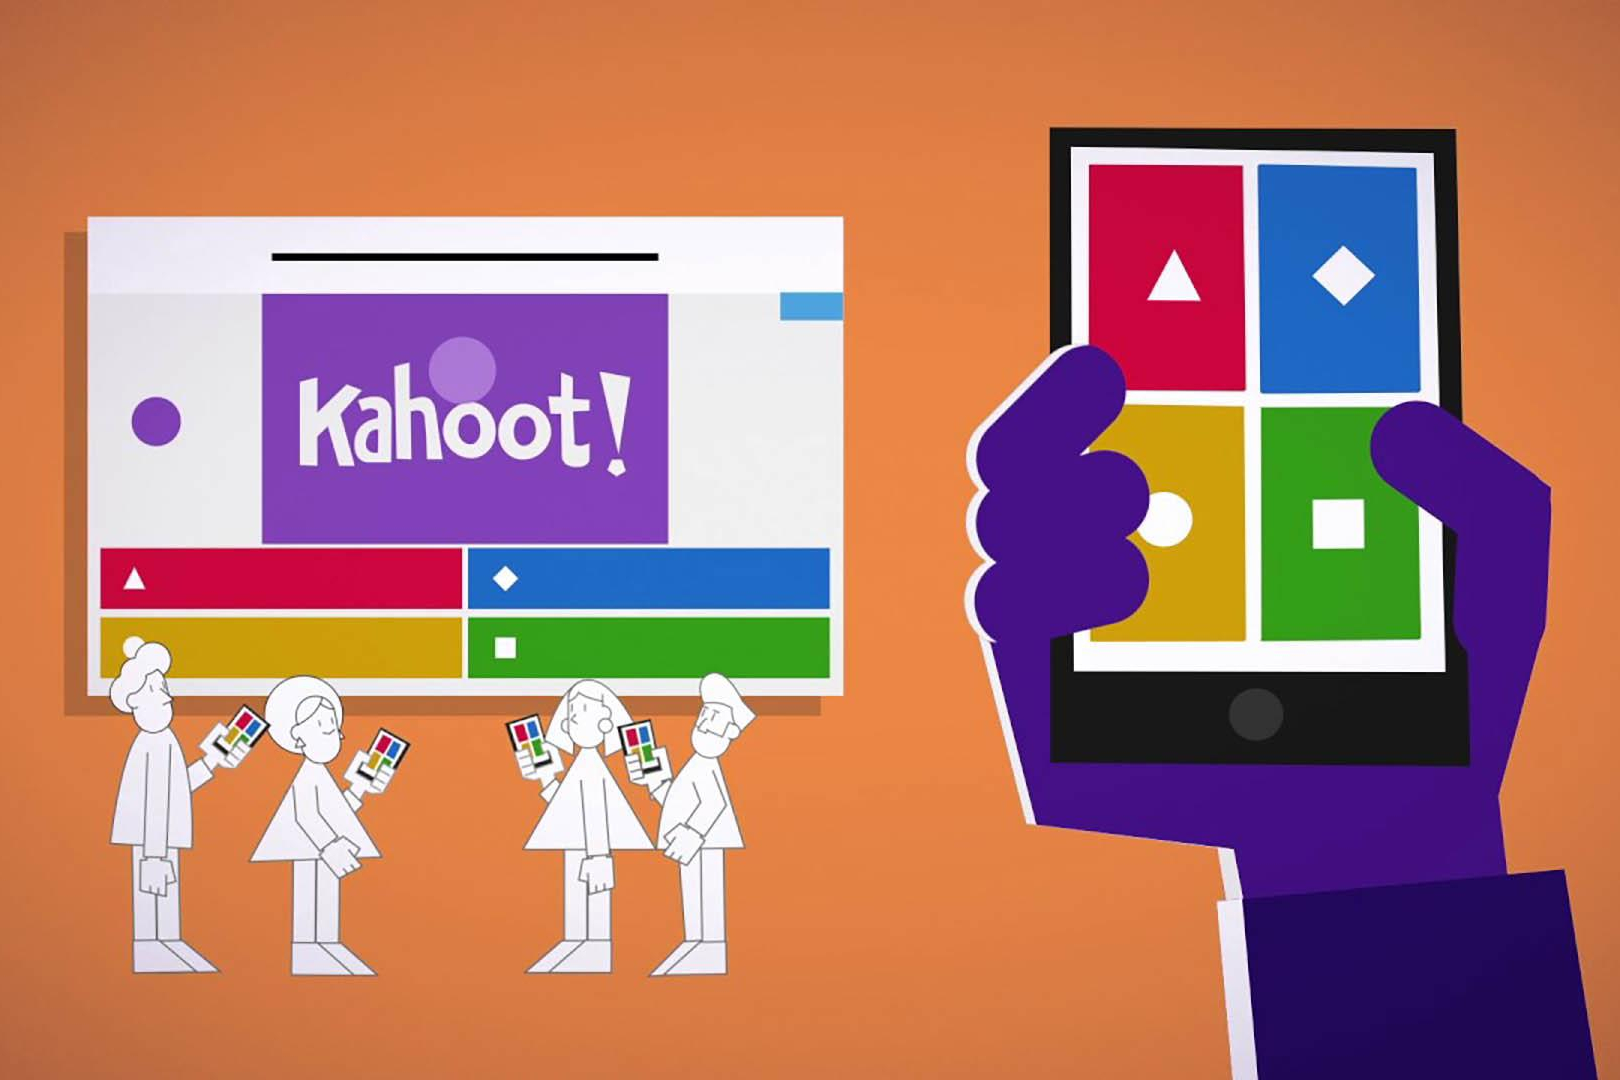 Picture showing people playing with Kahoot